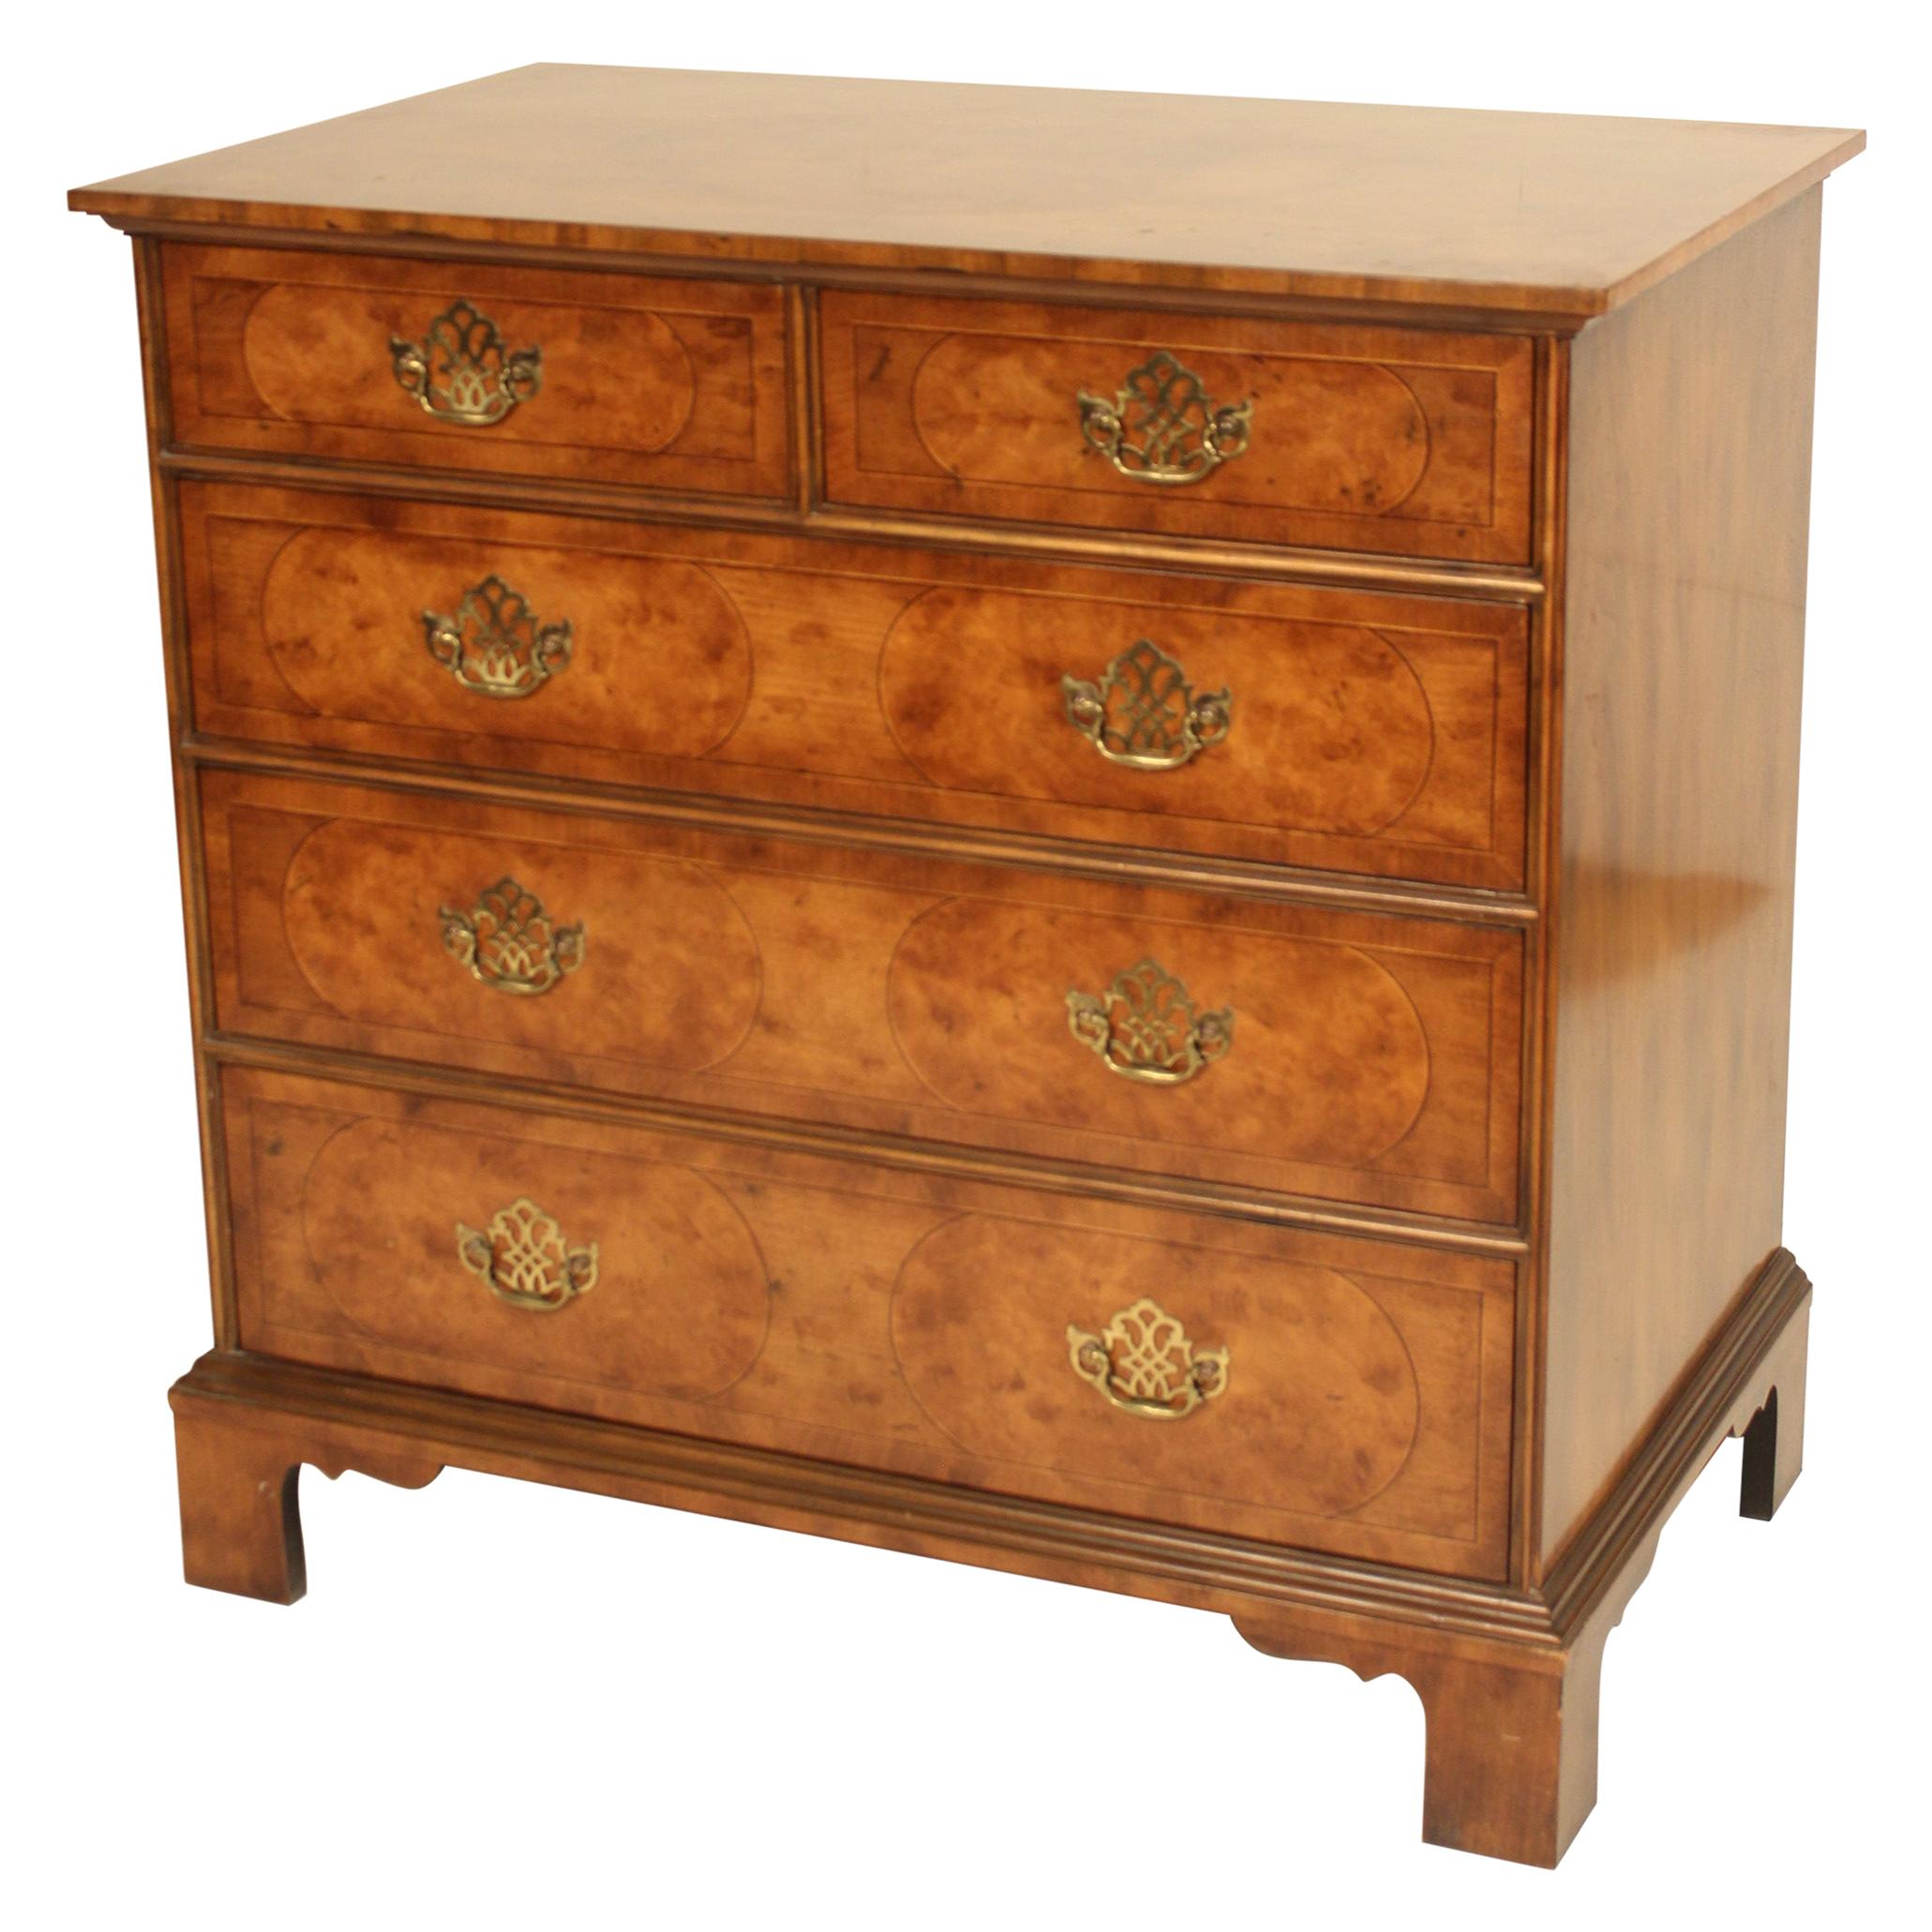 Queen Anne Style Chest of Drawers, Made by Baker Furniture